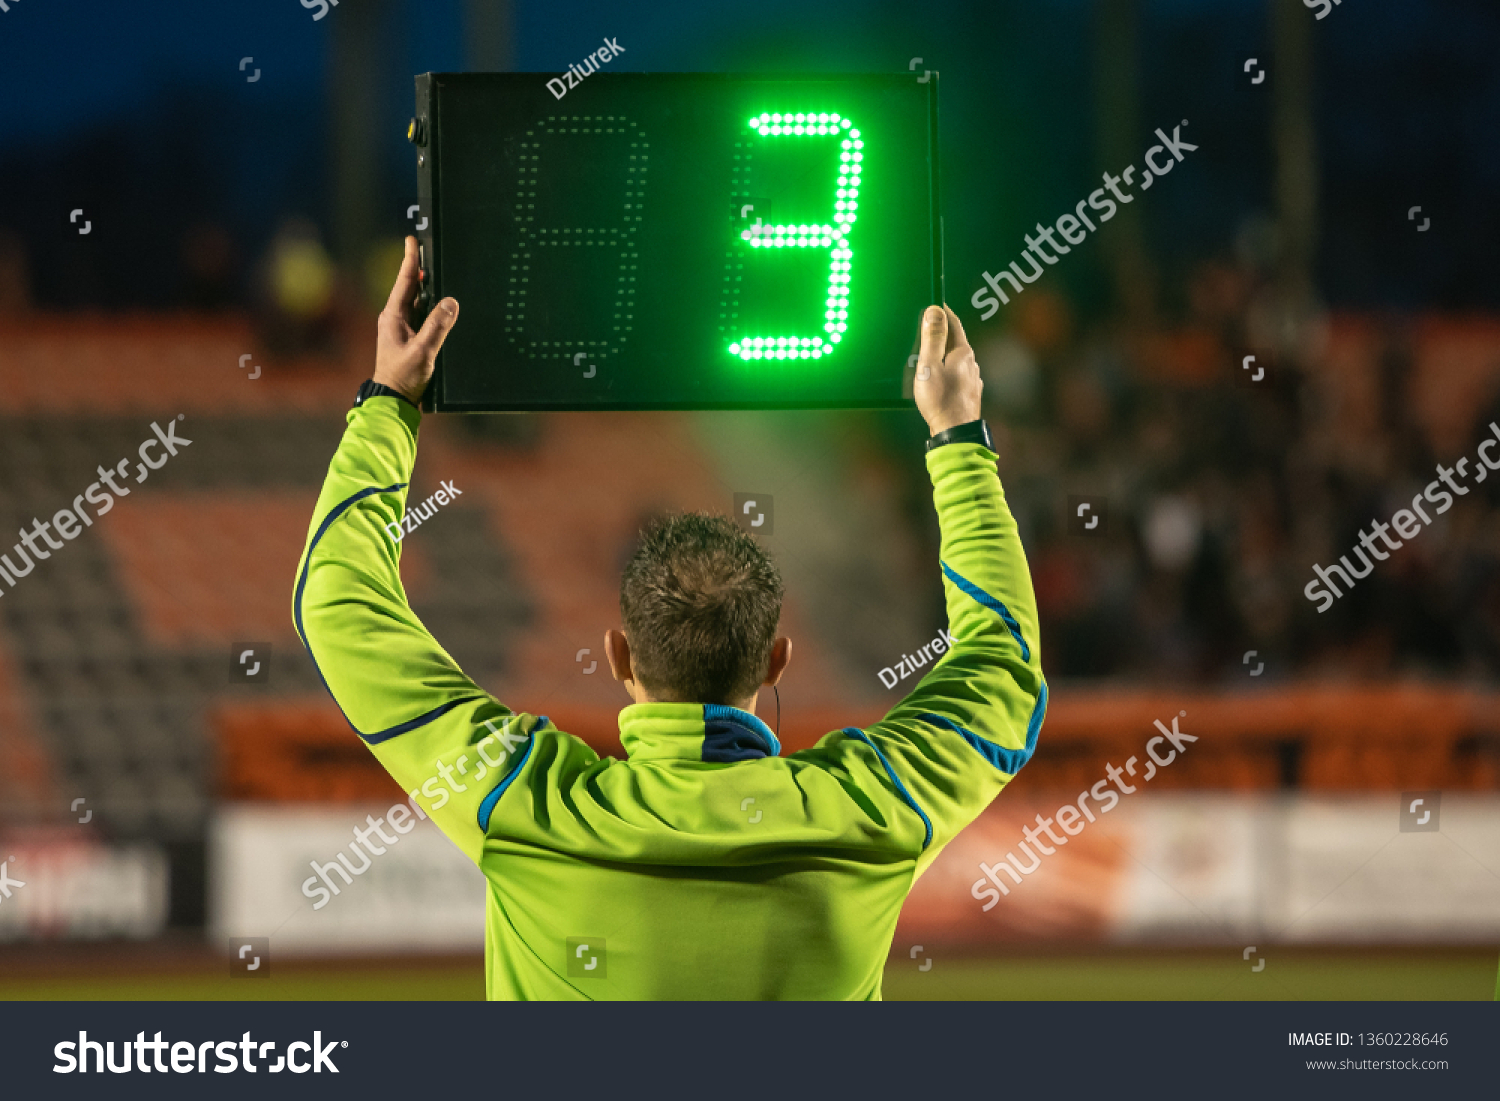 Technical referee shows 3 minutes added time during the football match. #1360228646